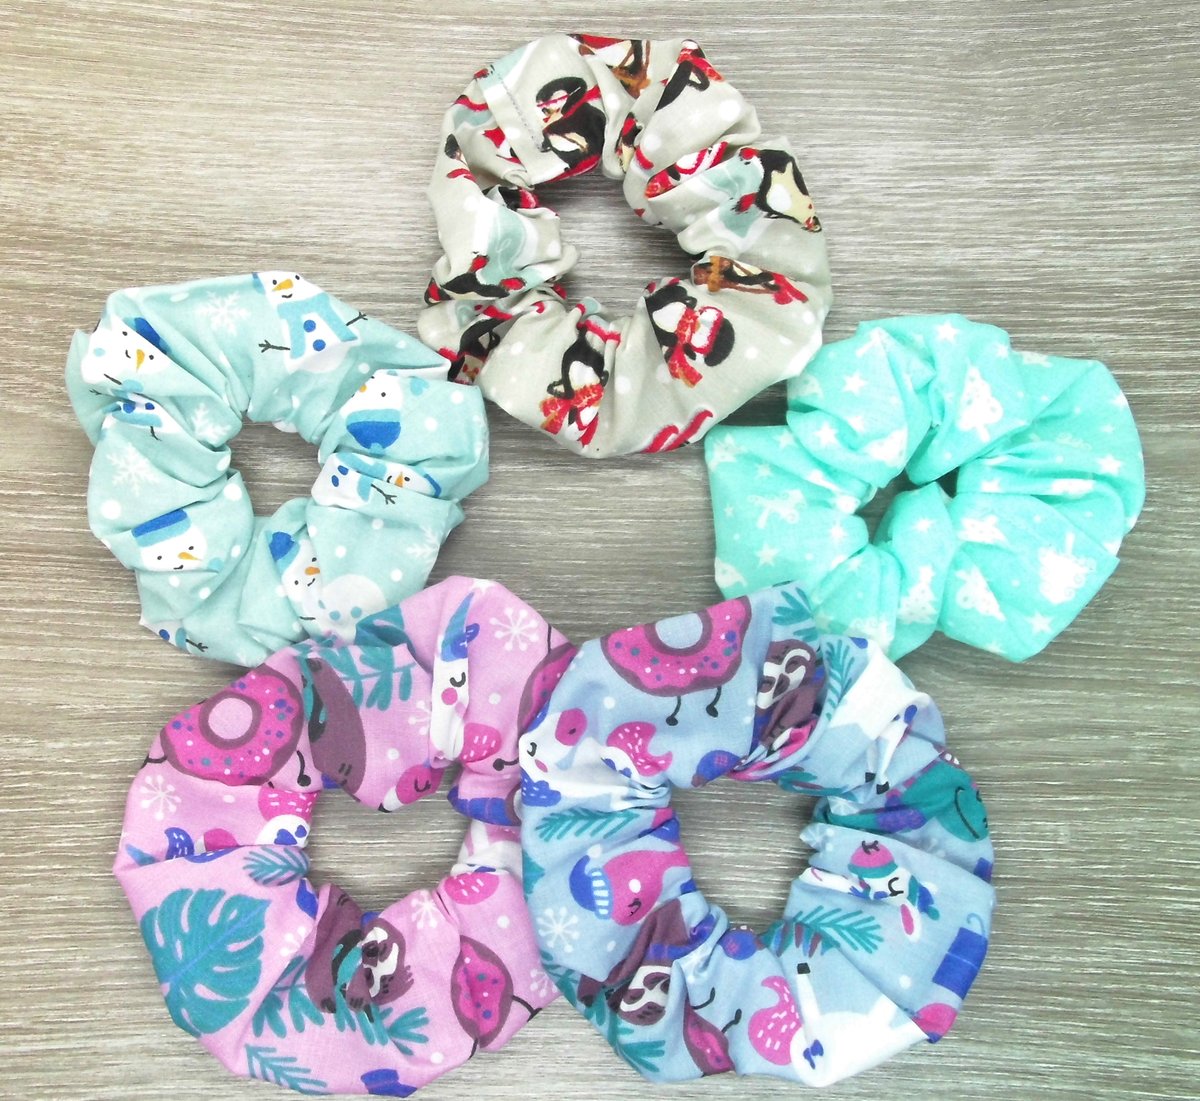 Morning #Earlybiz. Now is the time to start buying your Christmas scrunchies. Full selection on my website!
#MHHSBD #Craftbizparty #UKMakers #htlmp #SBS #ShopIndie #SmartSocial